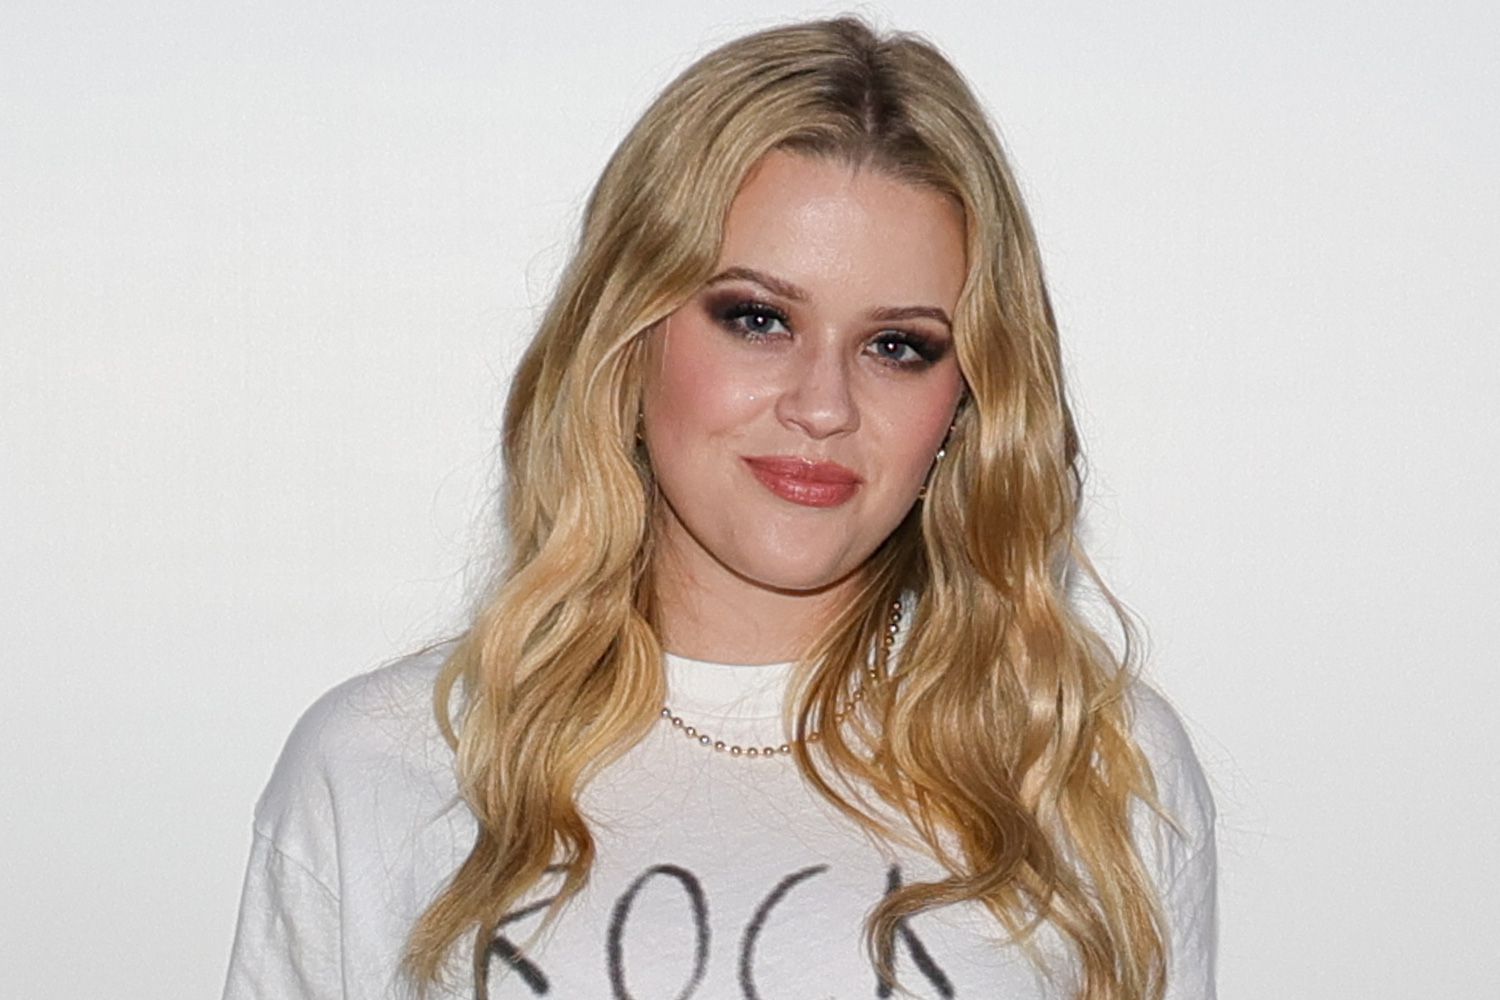 Ava Phillippe Calls Out Trolls Commenting on Her Appearance Online [Video]